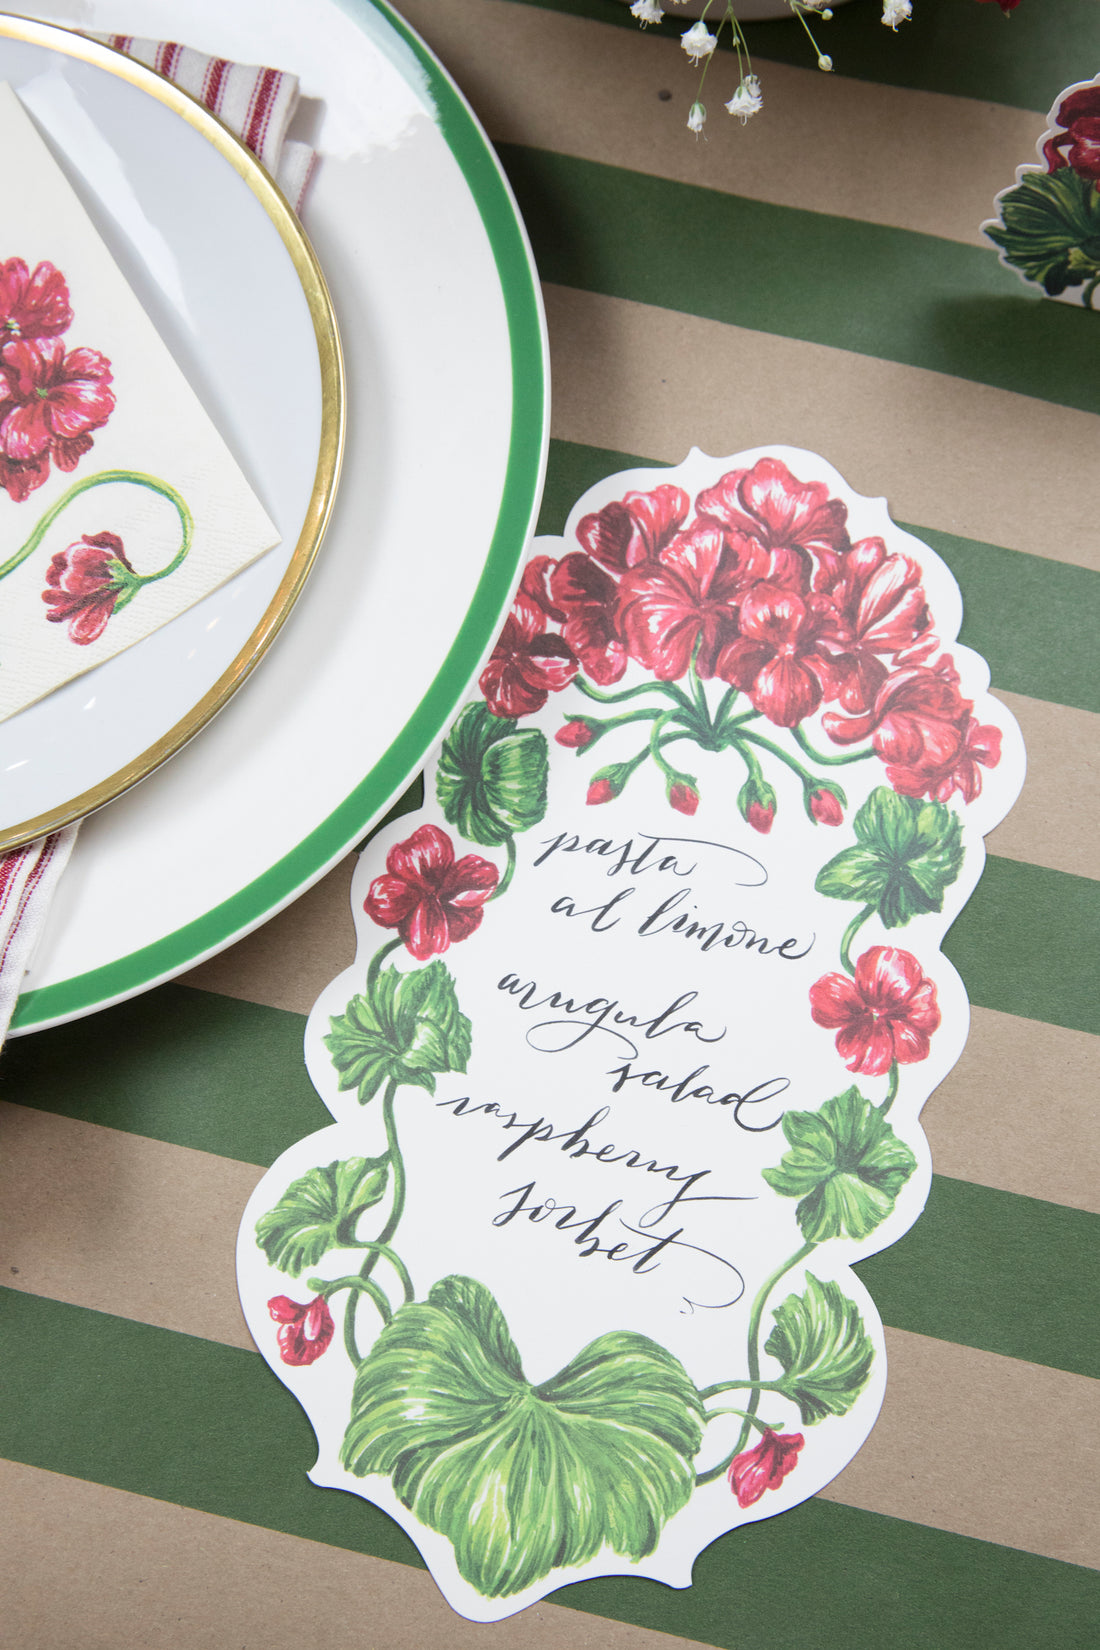 A Geranium Table Accent with a menu written on it in beautiful cursive resting next to the plate of an elegant table setting.